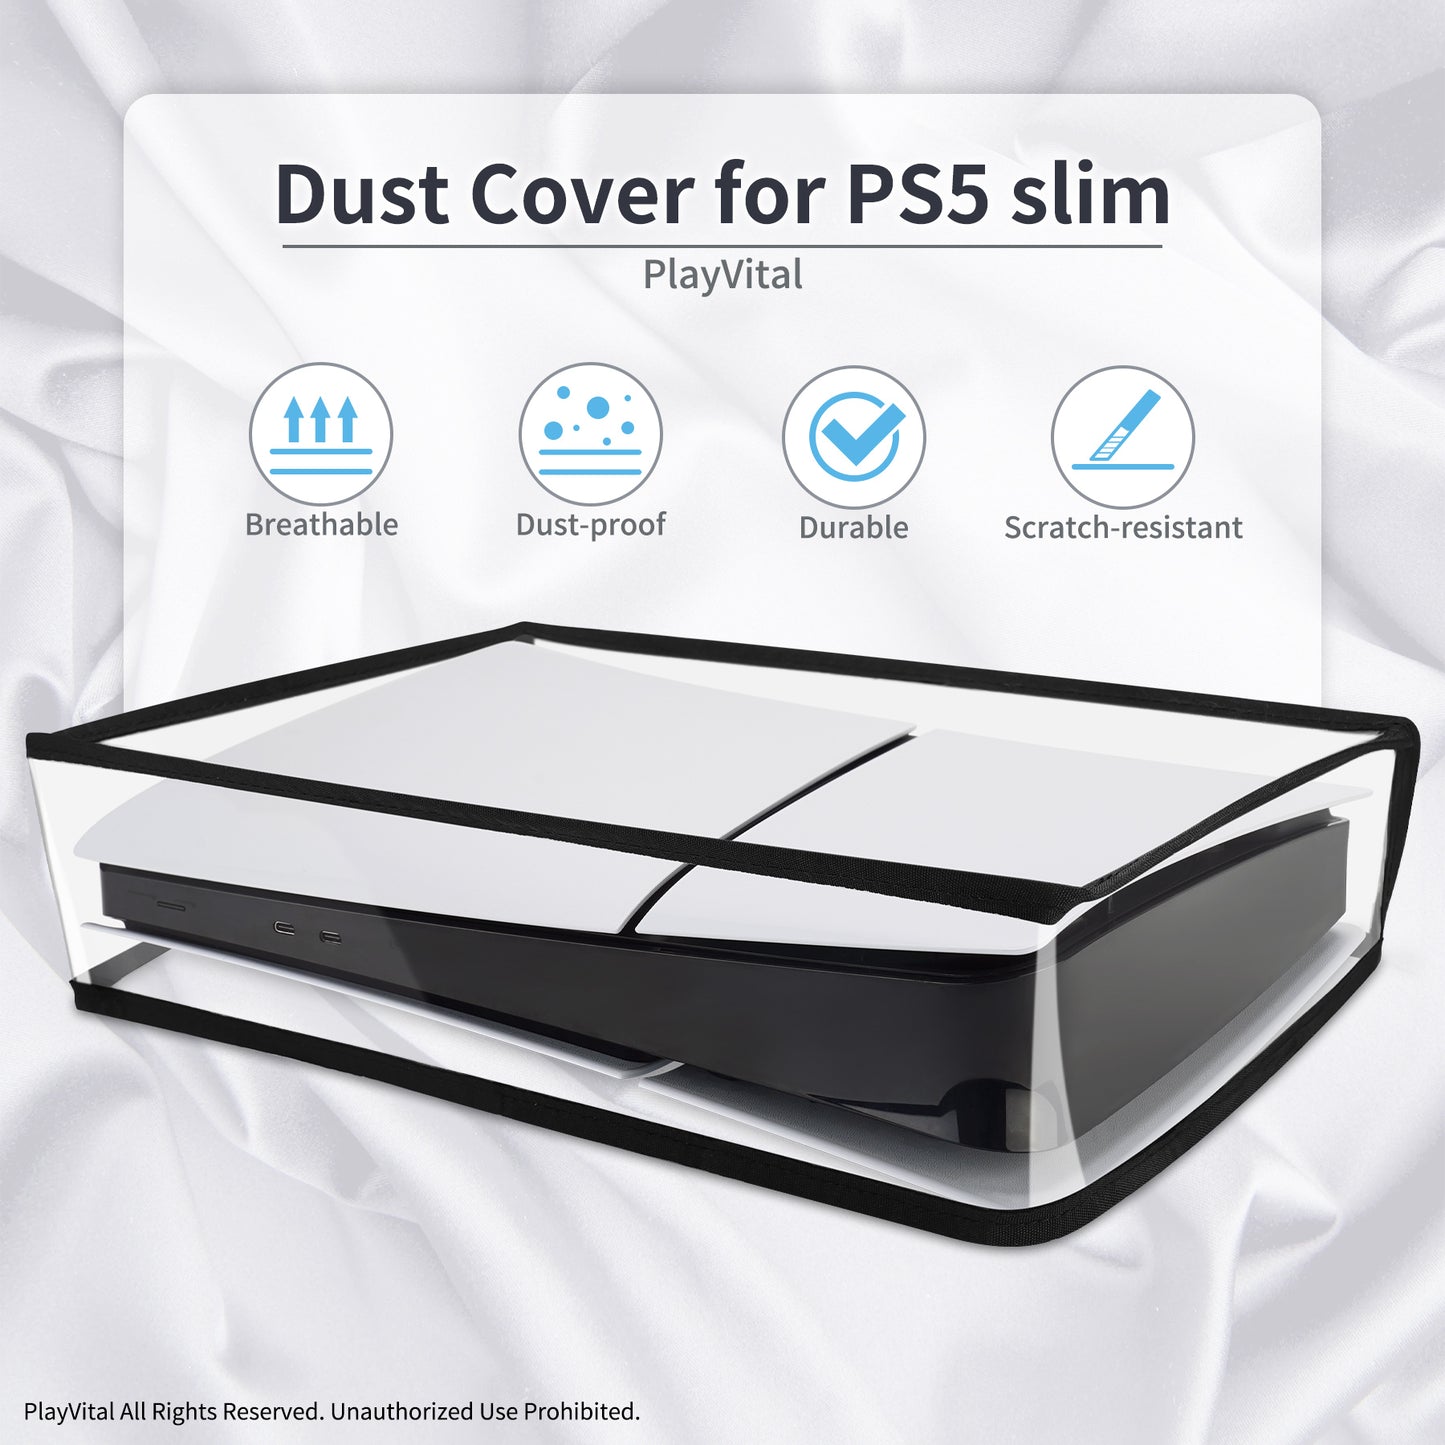 PlayVital Horizontal Dust Cover for ps5 Slim Digital Edition(The New Smaller Design), Transparent Dust Proof Protector Waterproof Cover Sleeve for ps5 Slim Console - RTKPFM003 PlayVital